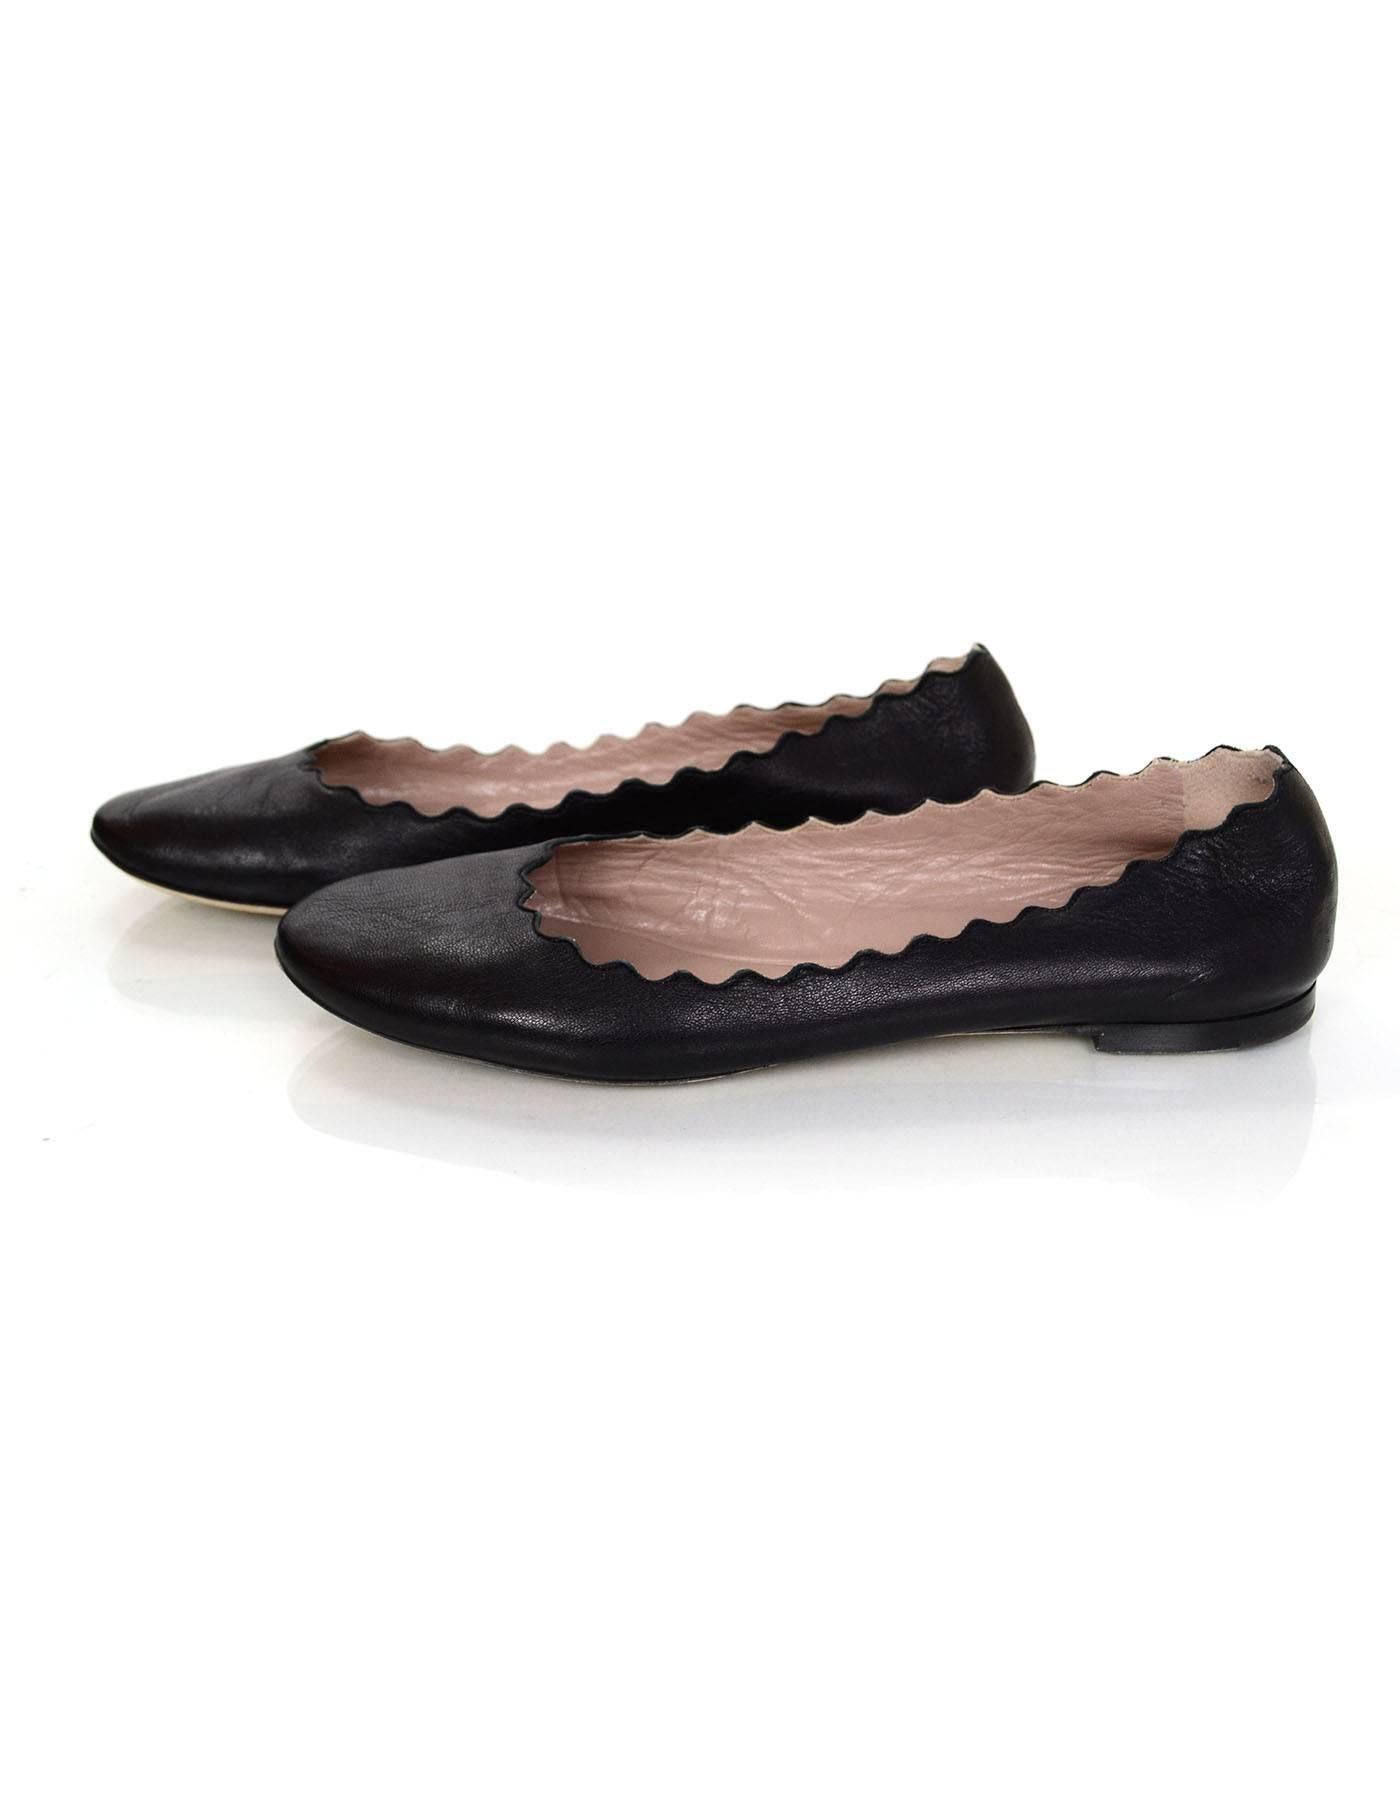 100% Authentic Chloe black leather Lauren flats sz 40 with scalloped trim
Made In: Italy
Color: Black
Materials: Leather
Closure: Slip on
Sole Stamp: Chloe Made in Italy 40
Retail Price: $475 + tax
Overall Condition: Excellent pre-owned